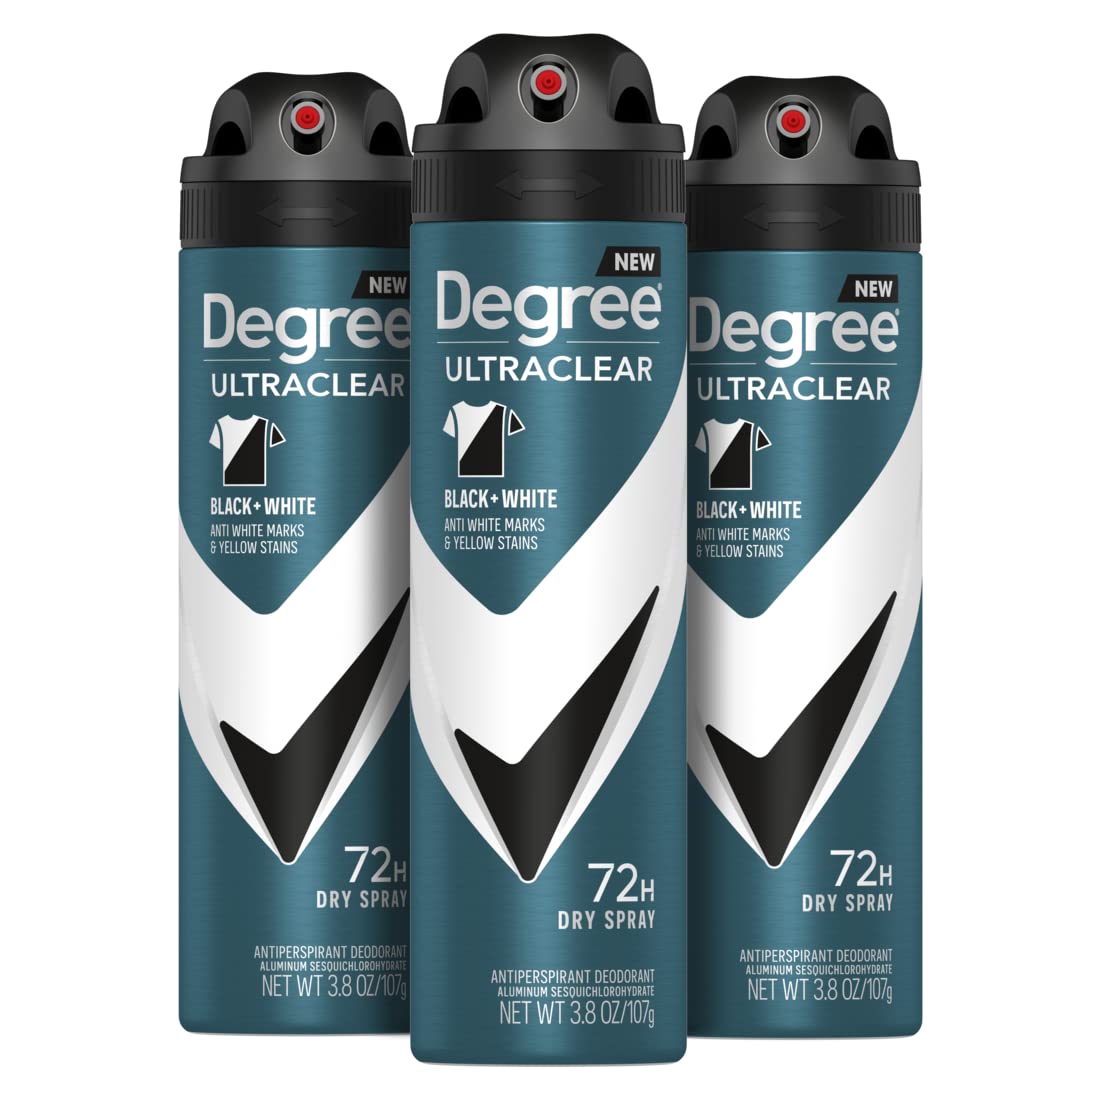 Degree Men Antiperspirant Deodorant Dry Spray Black + White 3 Count Protects from Deodorant Stains Antiperspirant for Men with MotionSense Technology 3.8 OZ